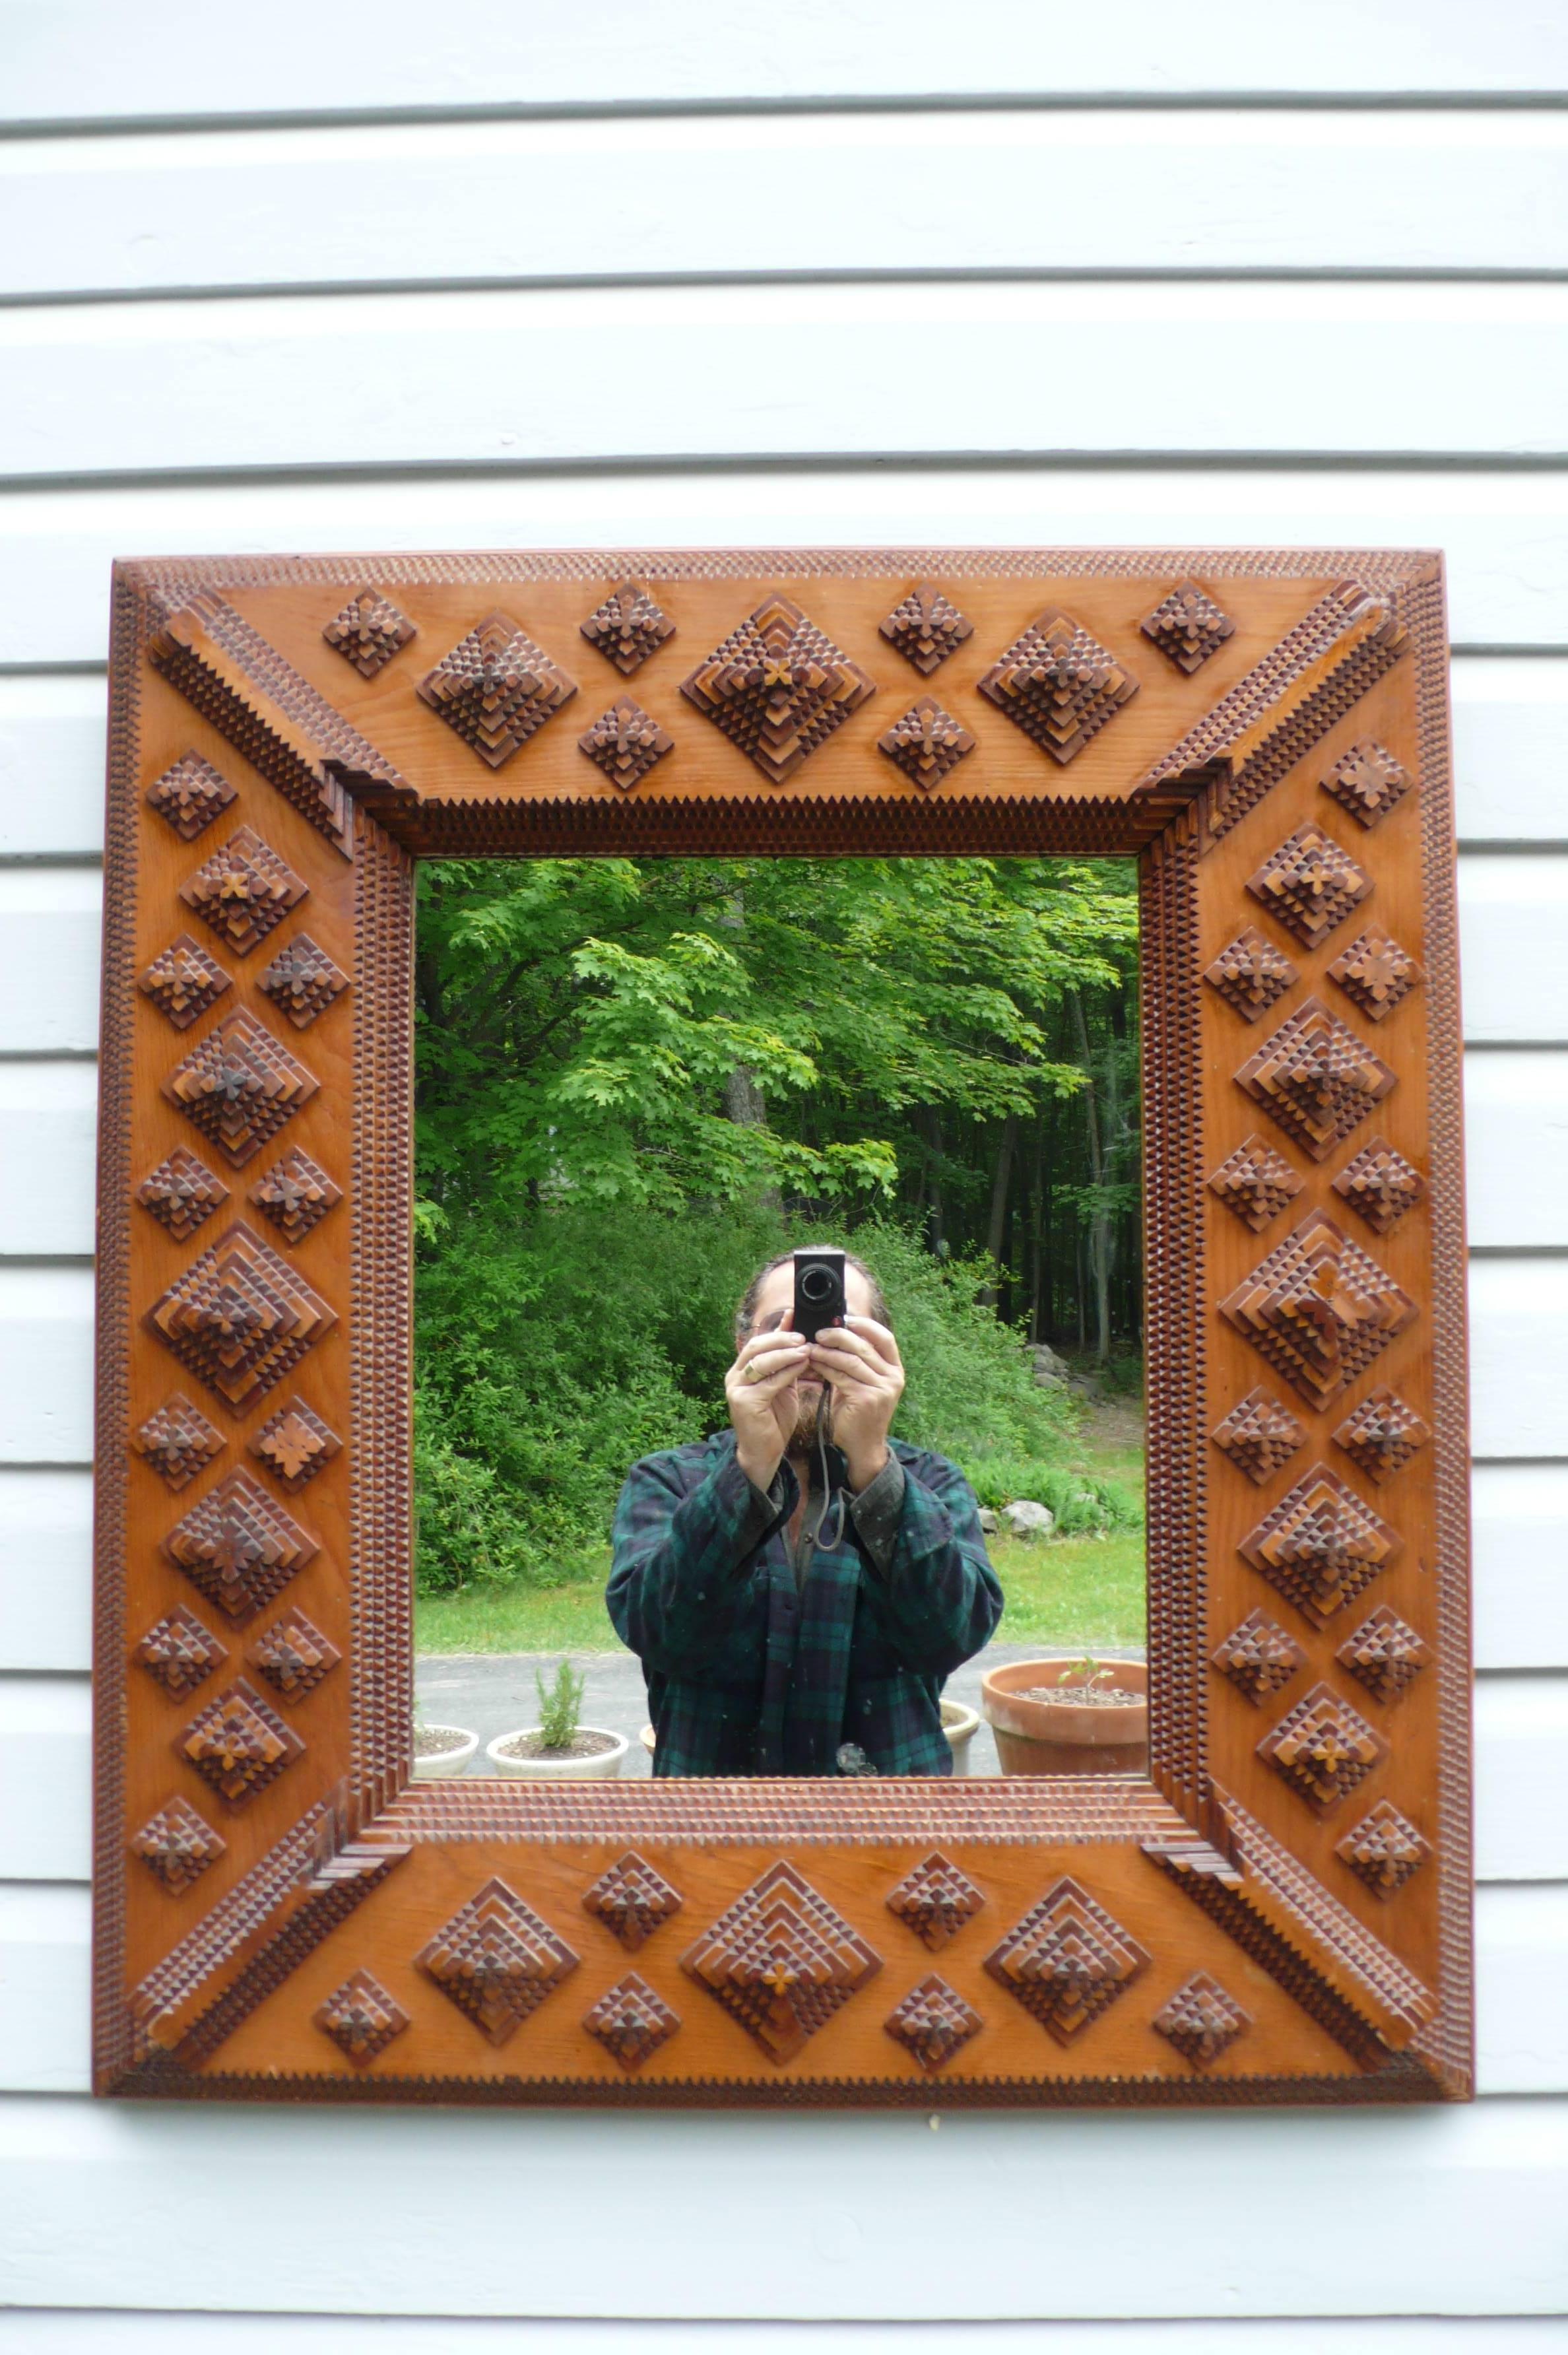 Large Tramp Art mirror. Tramp Art was an art movement found throughout the world where small pieces of wood, primarily from discarded cigar boxes and shipping crates, were whittled into layers of geometric shapes having the outside edges of each